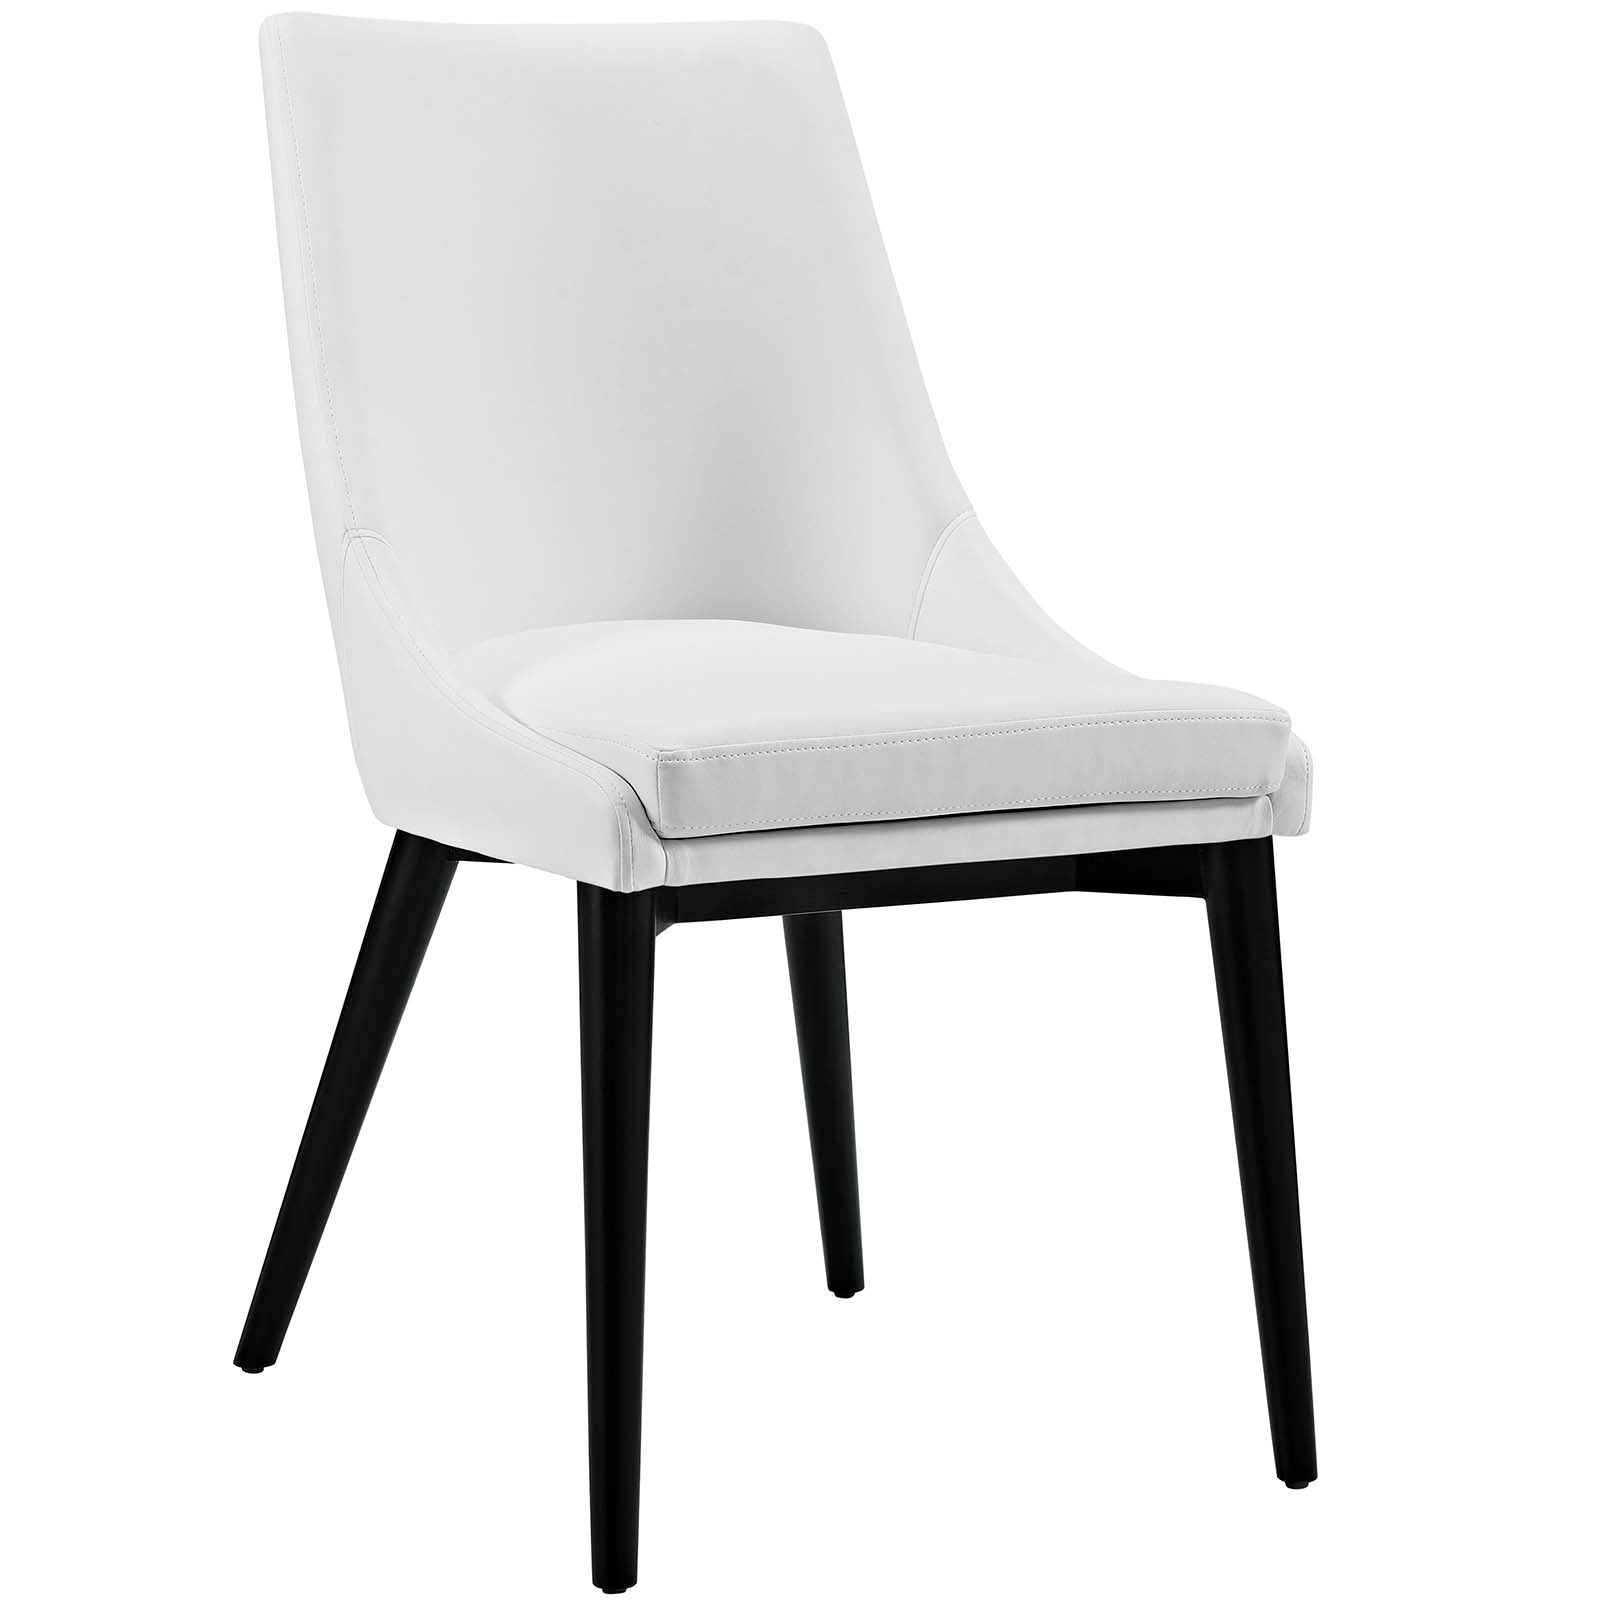 Modway Dining Chairs - Viscount Vinyl Dining Chair White